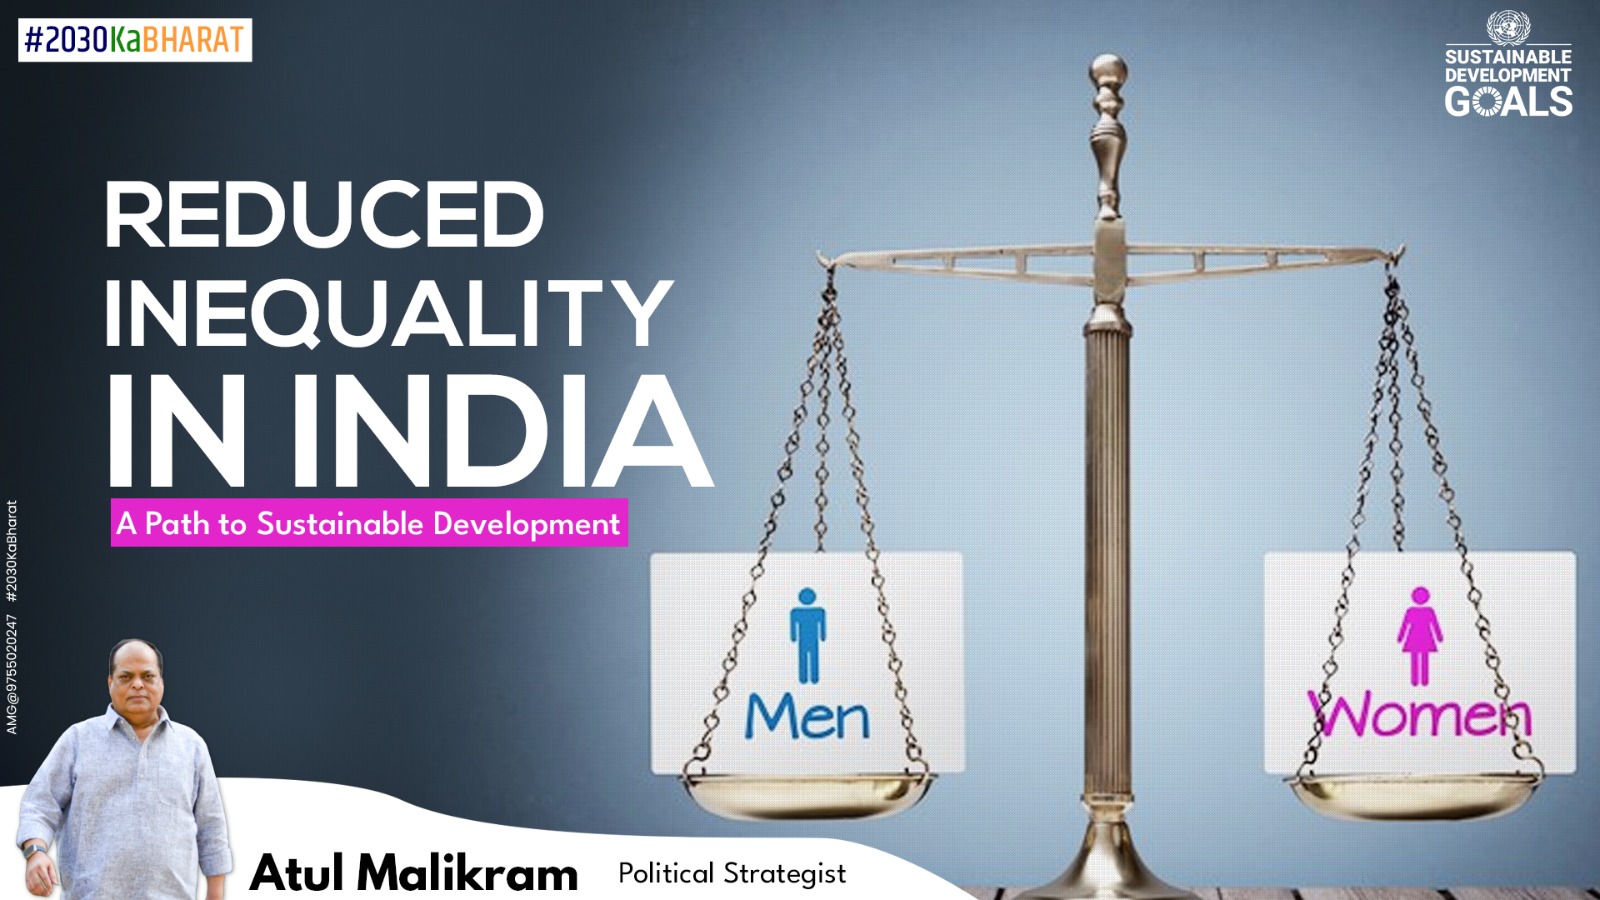 Reducing Inequality: Key to Sustainable Development in India